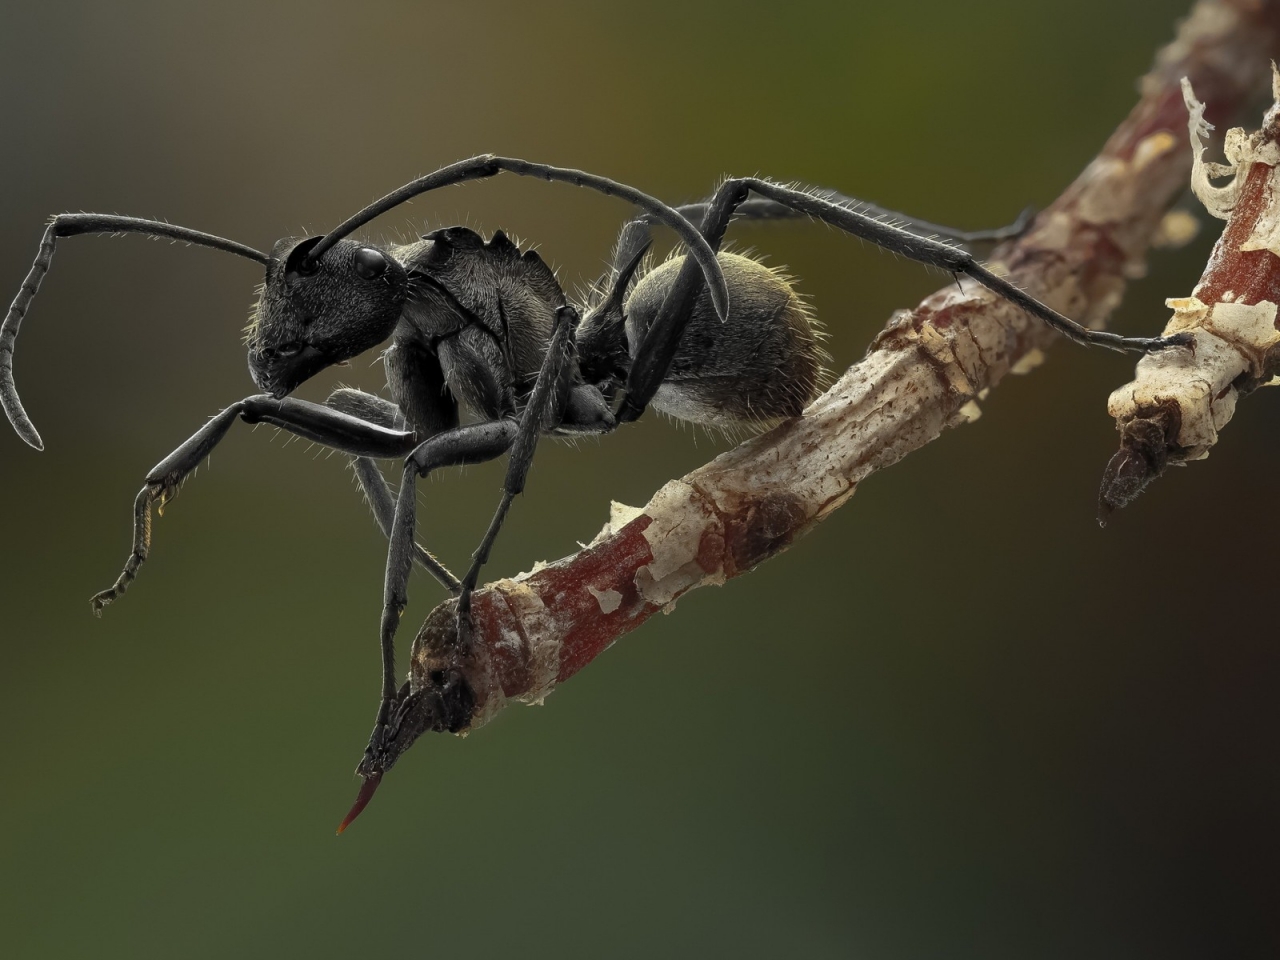 Ant Macro Photography for 1280 x 960 resolution